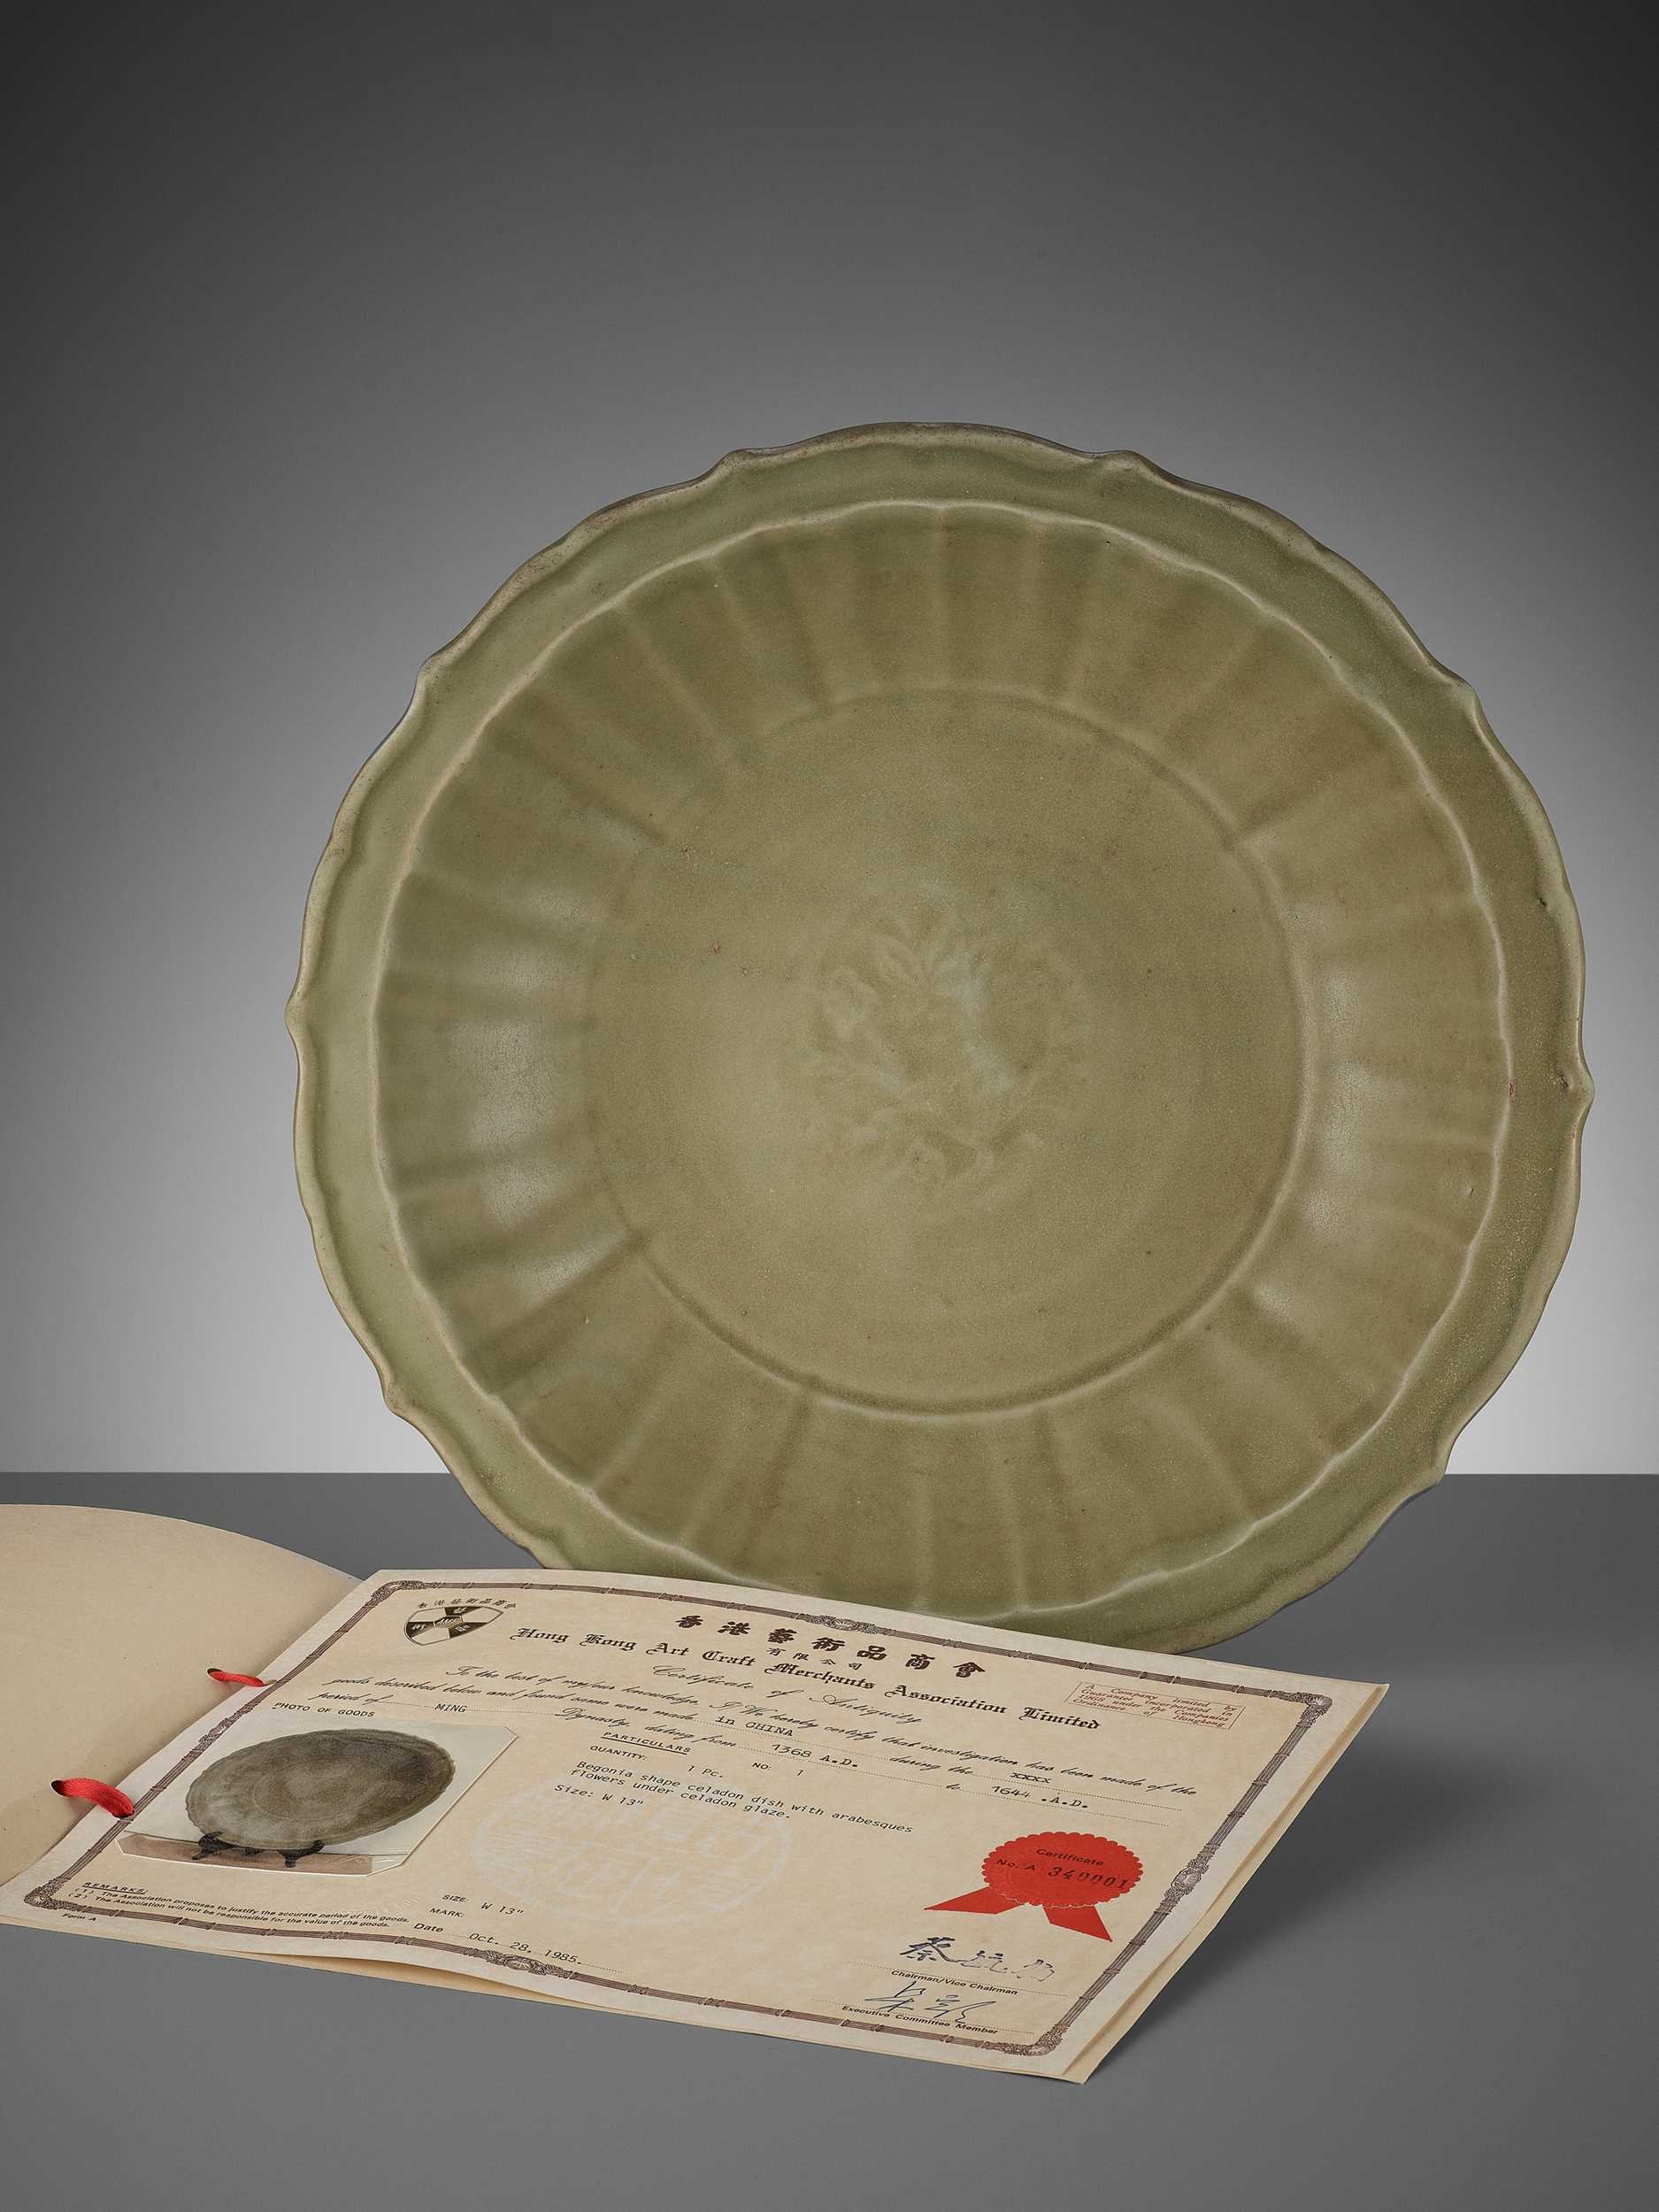 Lot 205 - A LOBED LONGQUAN CELADON-GLAZED BARBED-RIM CHARGER, MING